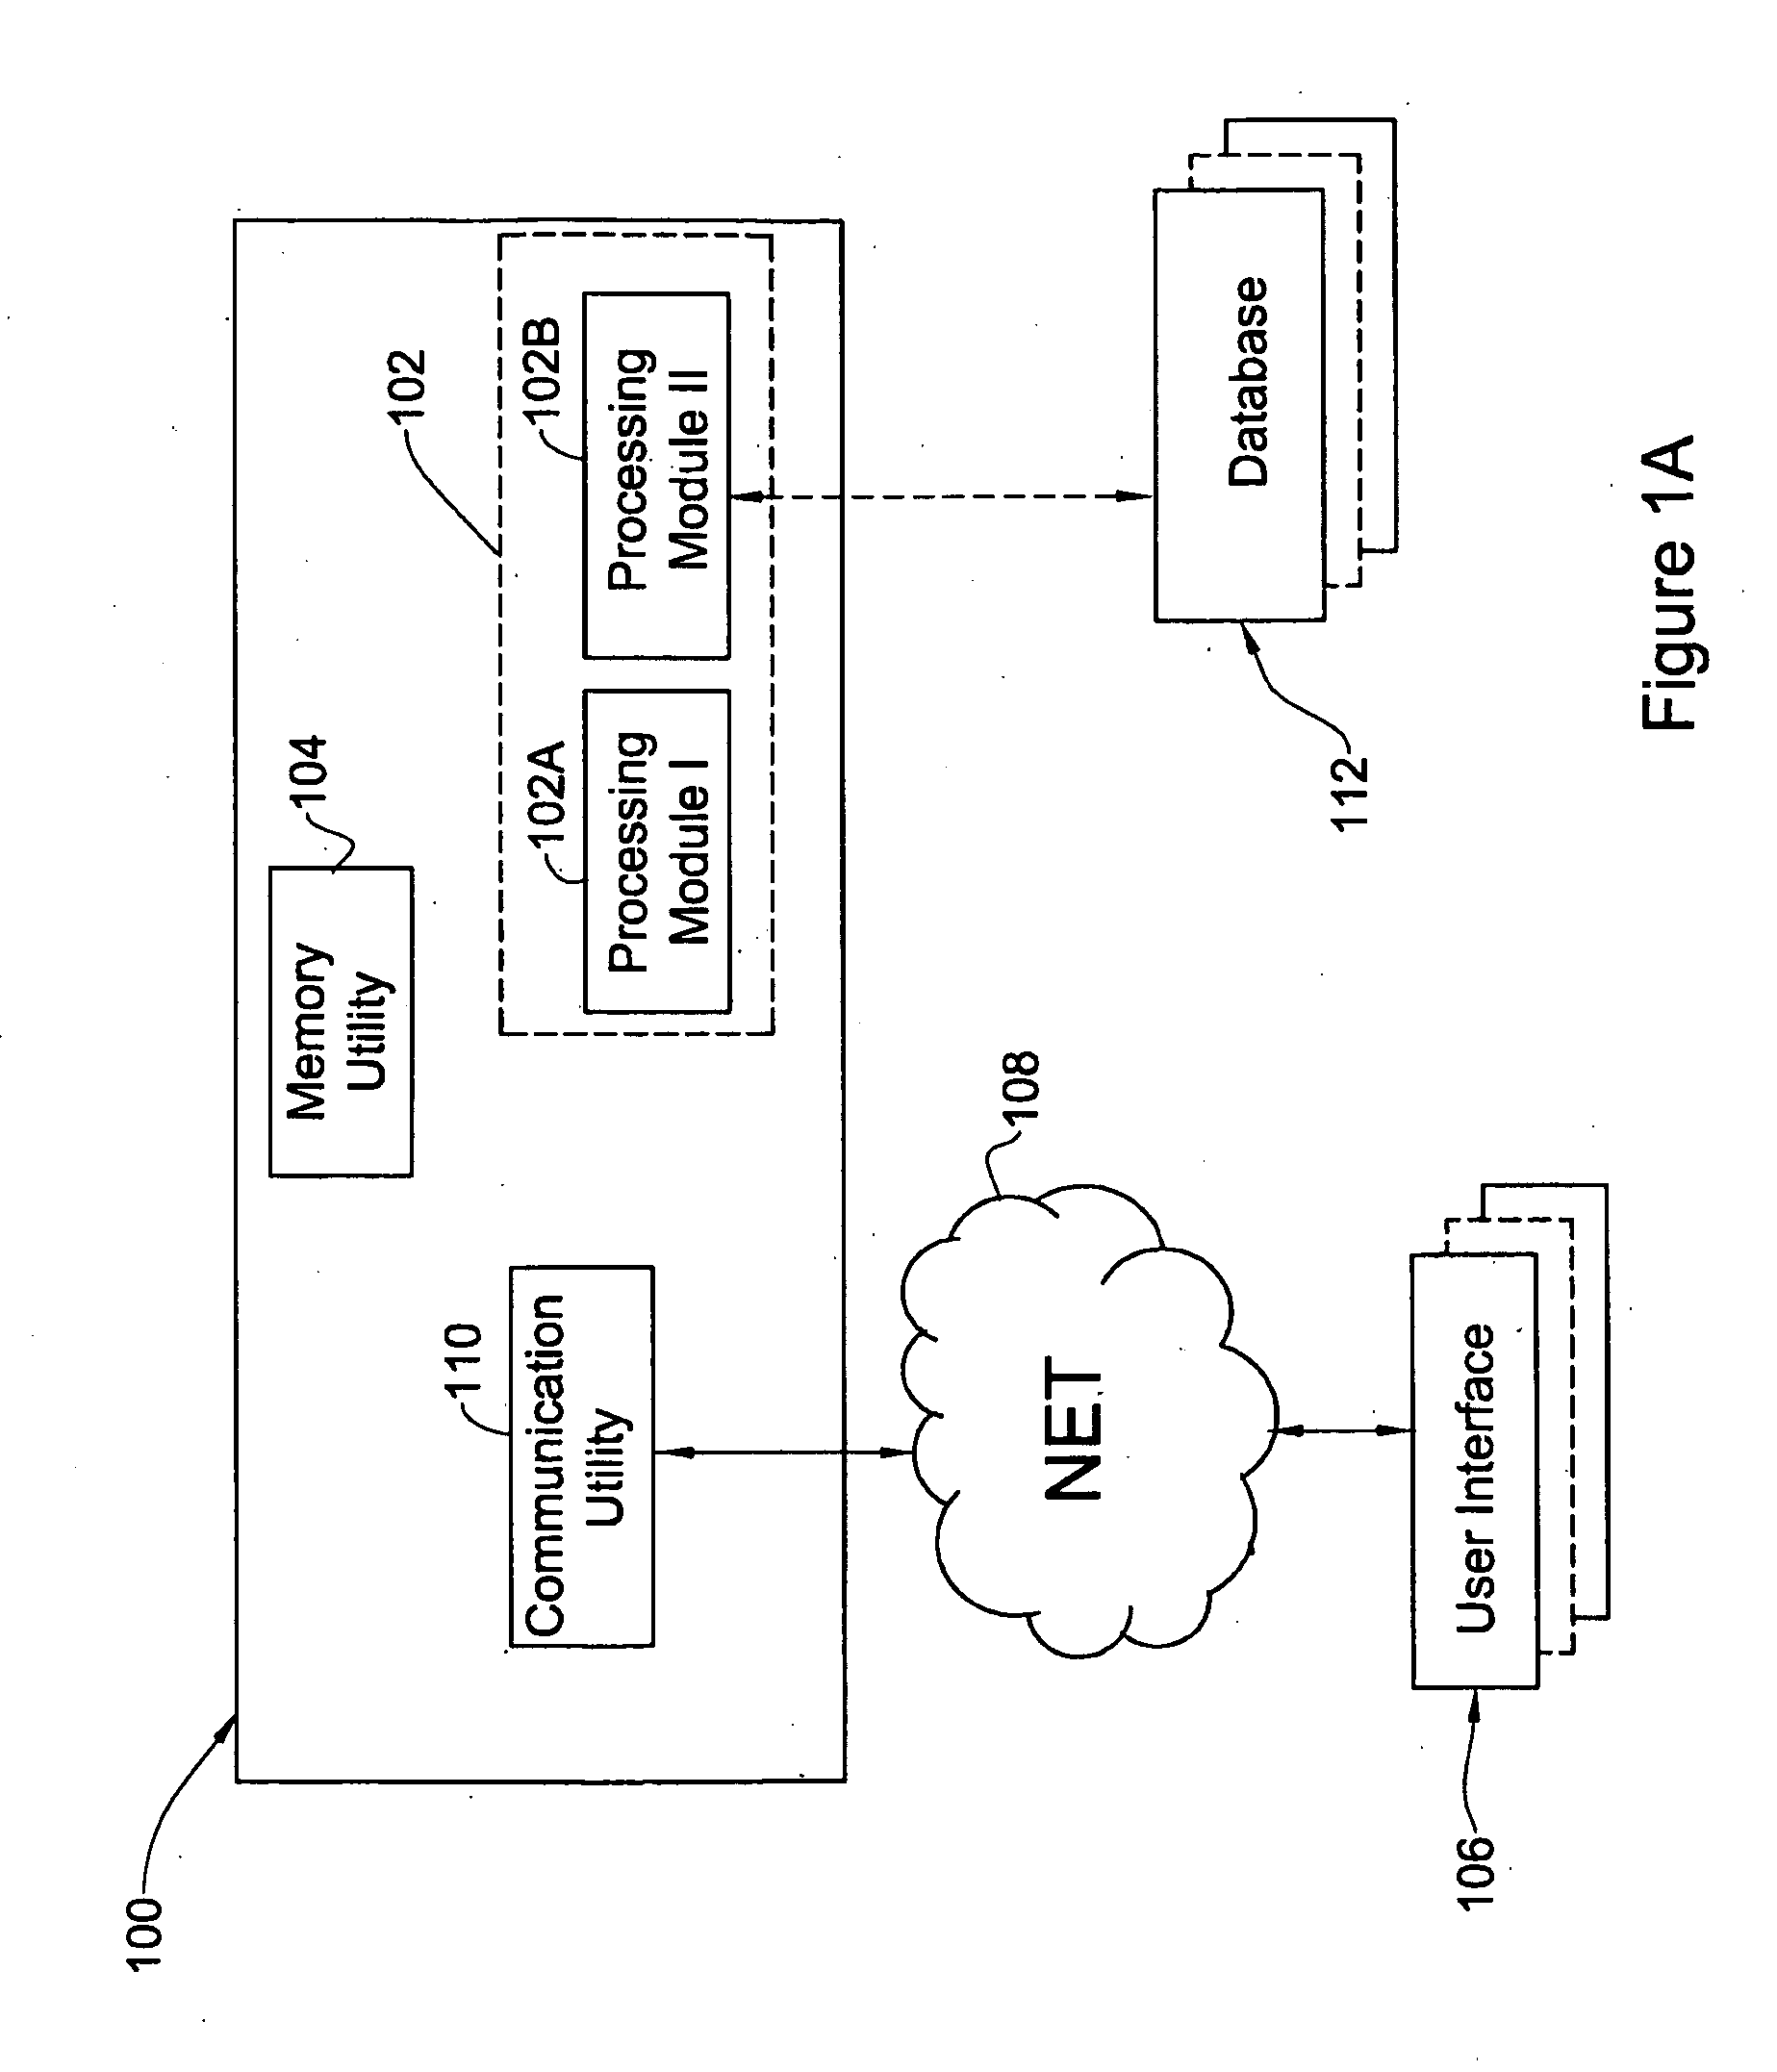 Method and System for Computerized Management of Related Data Records